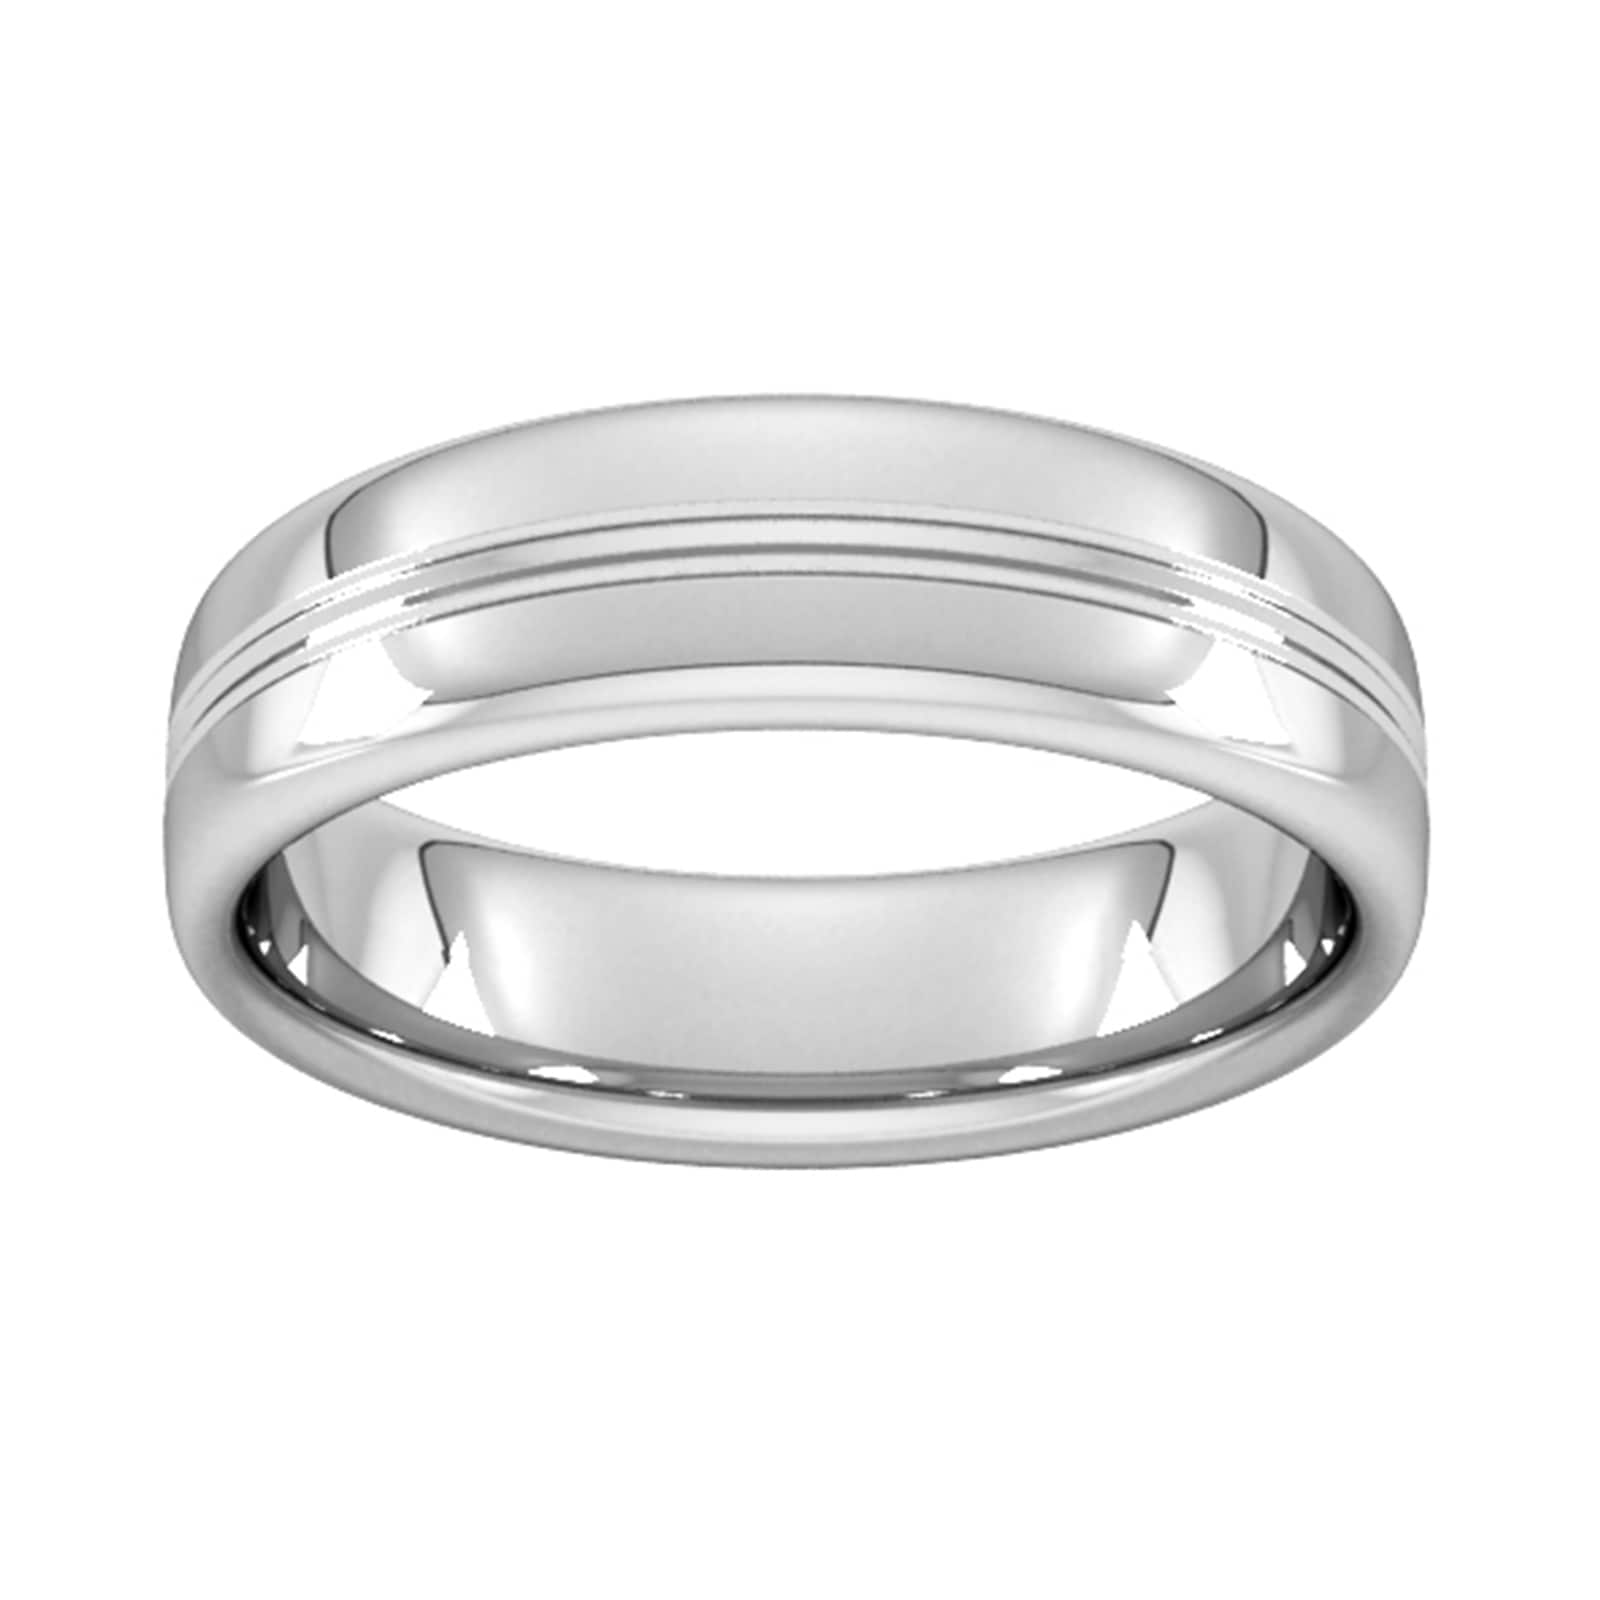 6mm Slight Court Heavy Grooved Polished Finish Wedding Ring In 18 Carat White Gold - Ring Size Q